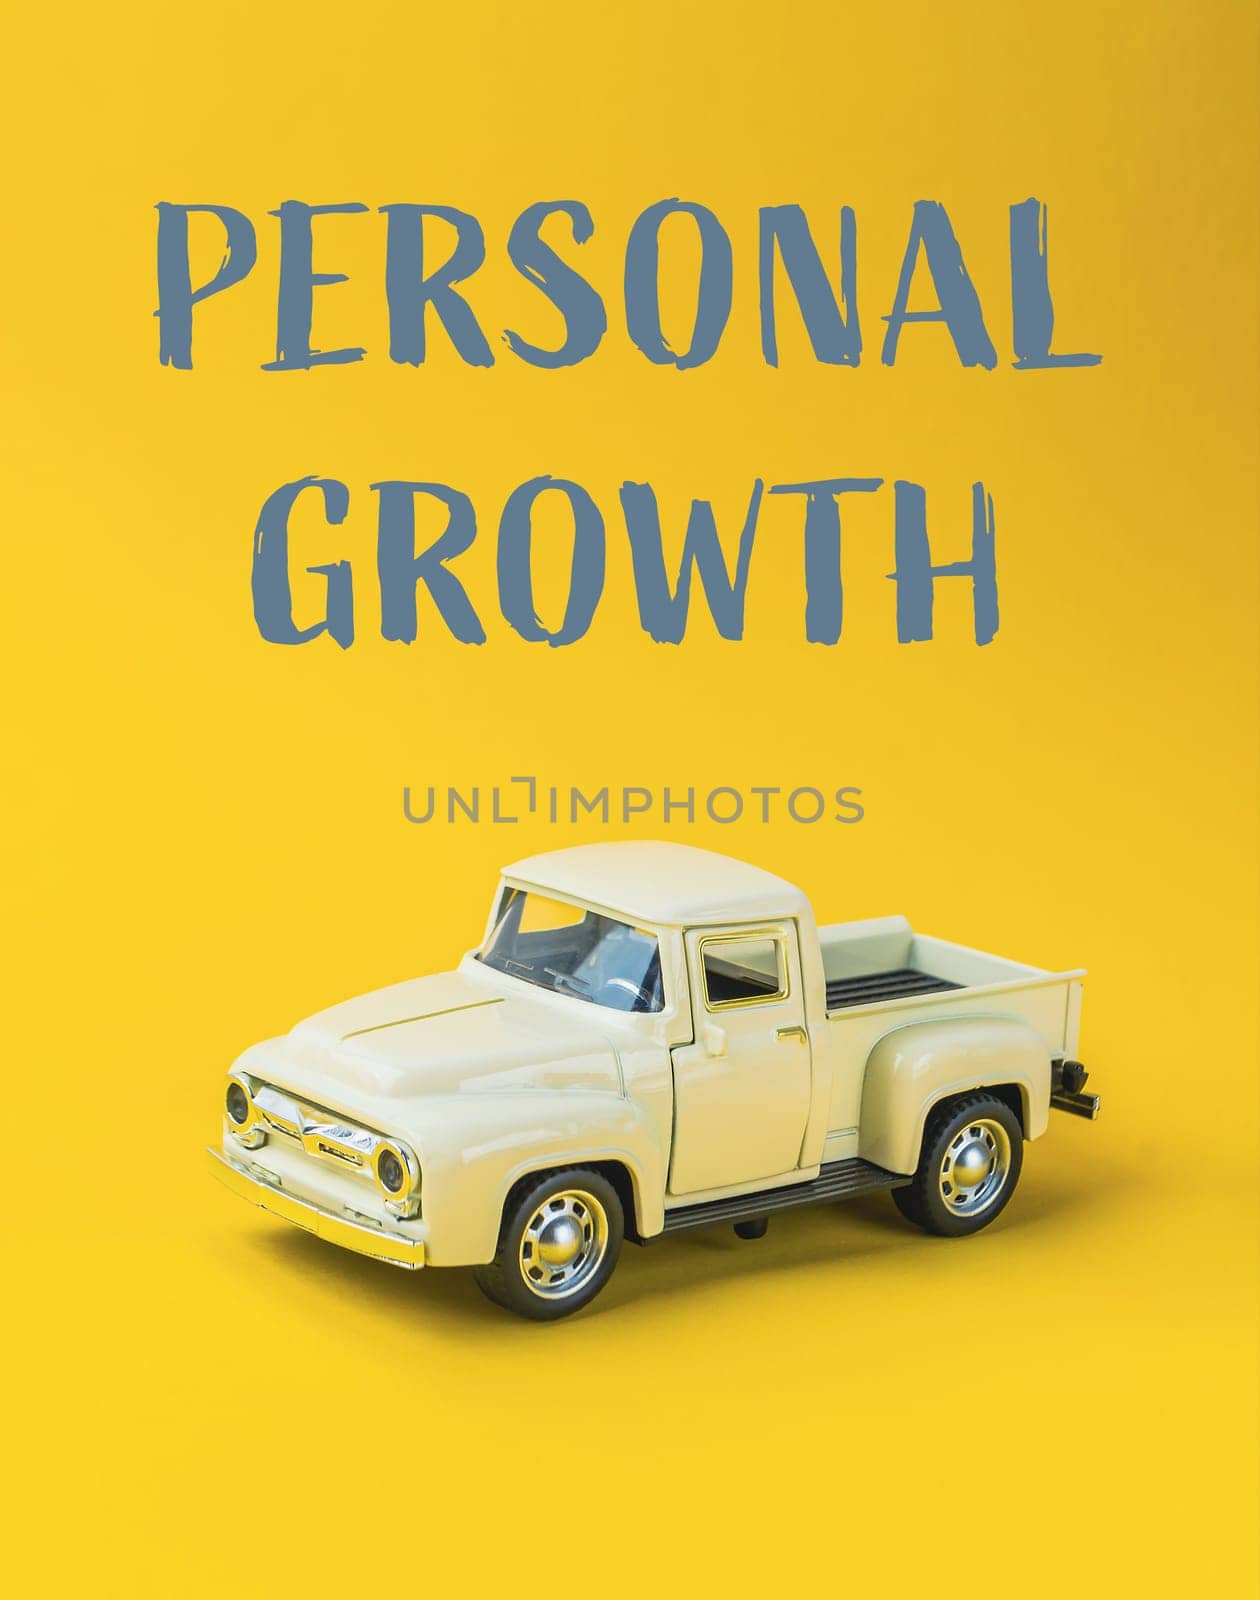 A toy truck is on a yellow background with the words Personal Growth written below it. Concept of personal growth and development, as the toy truck represents a journey or progress towards a goal